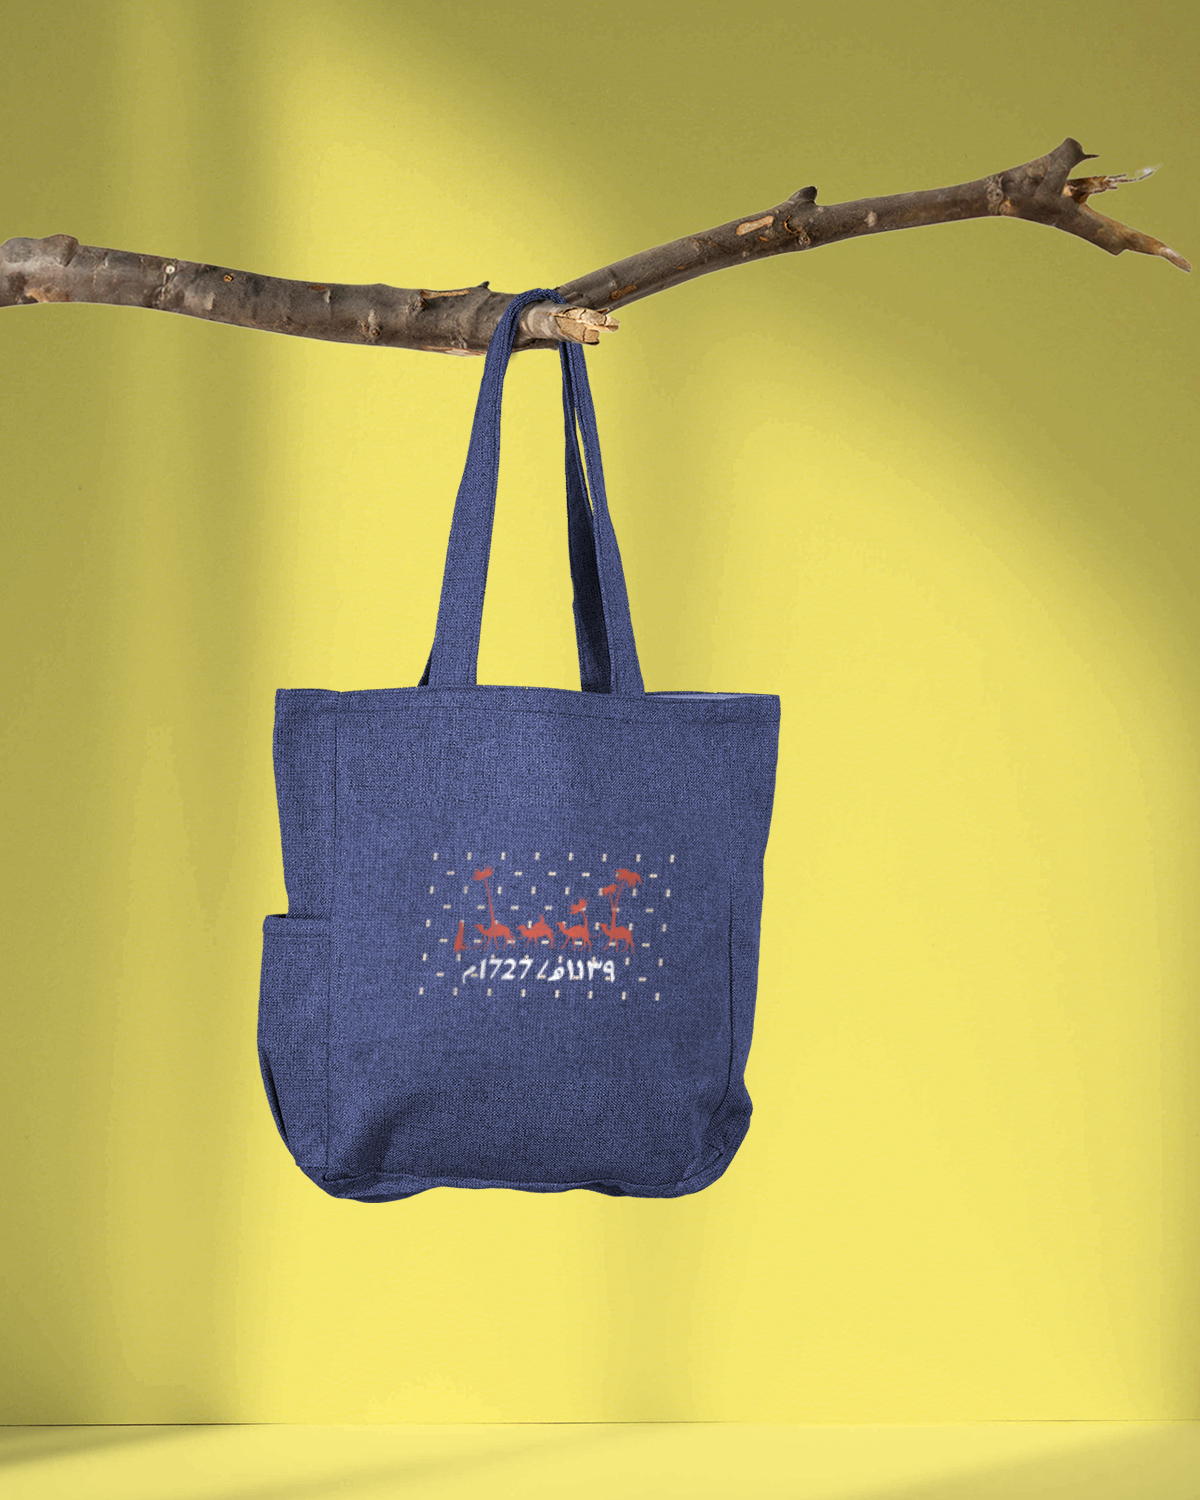 Foundation Day Tote Bag  (1139 AH/1727 AD)